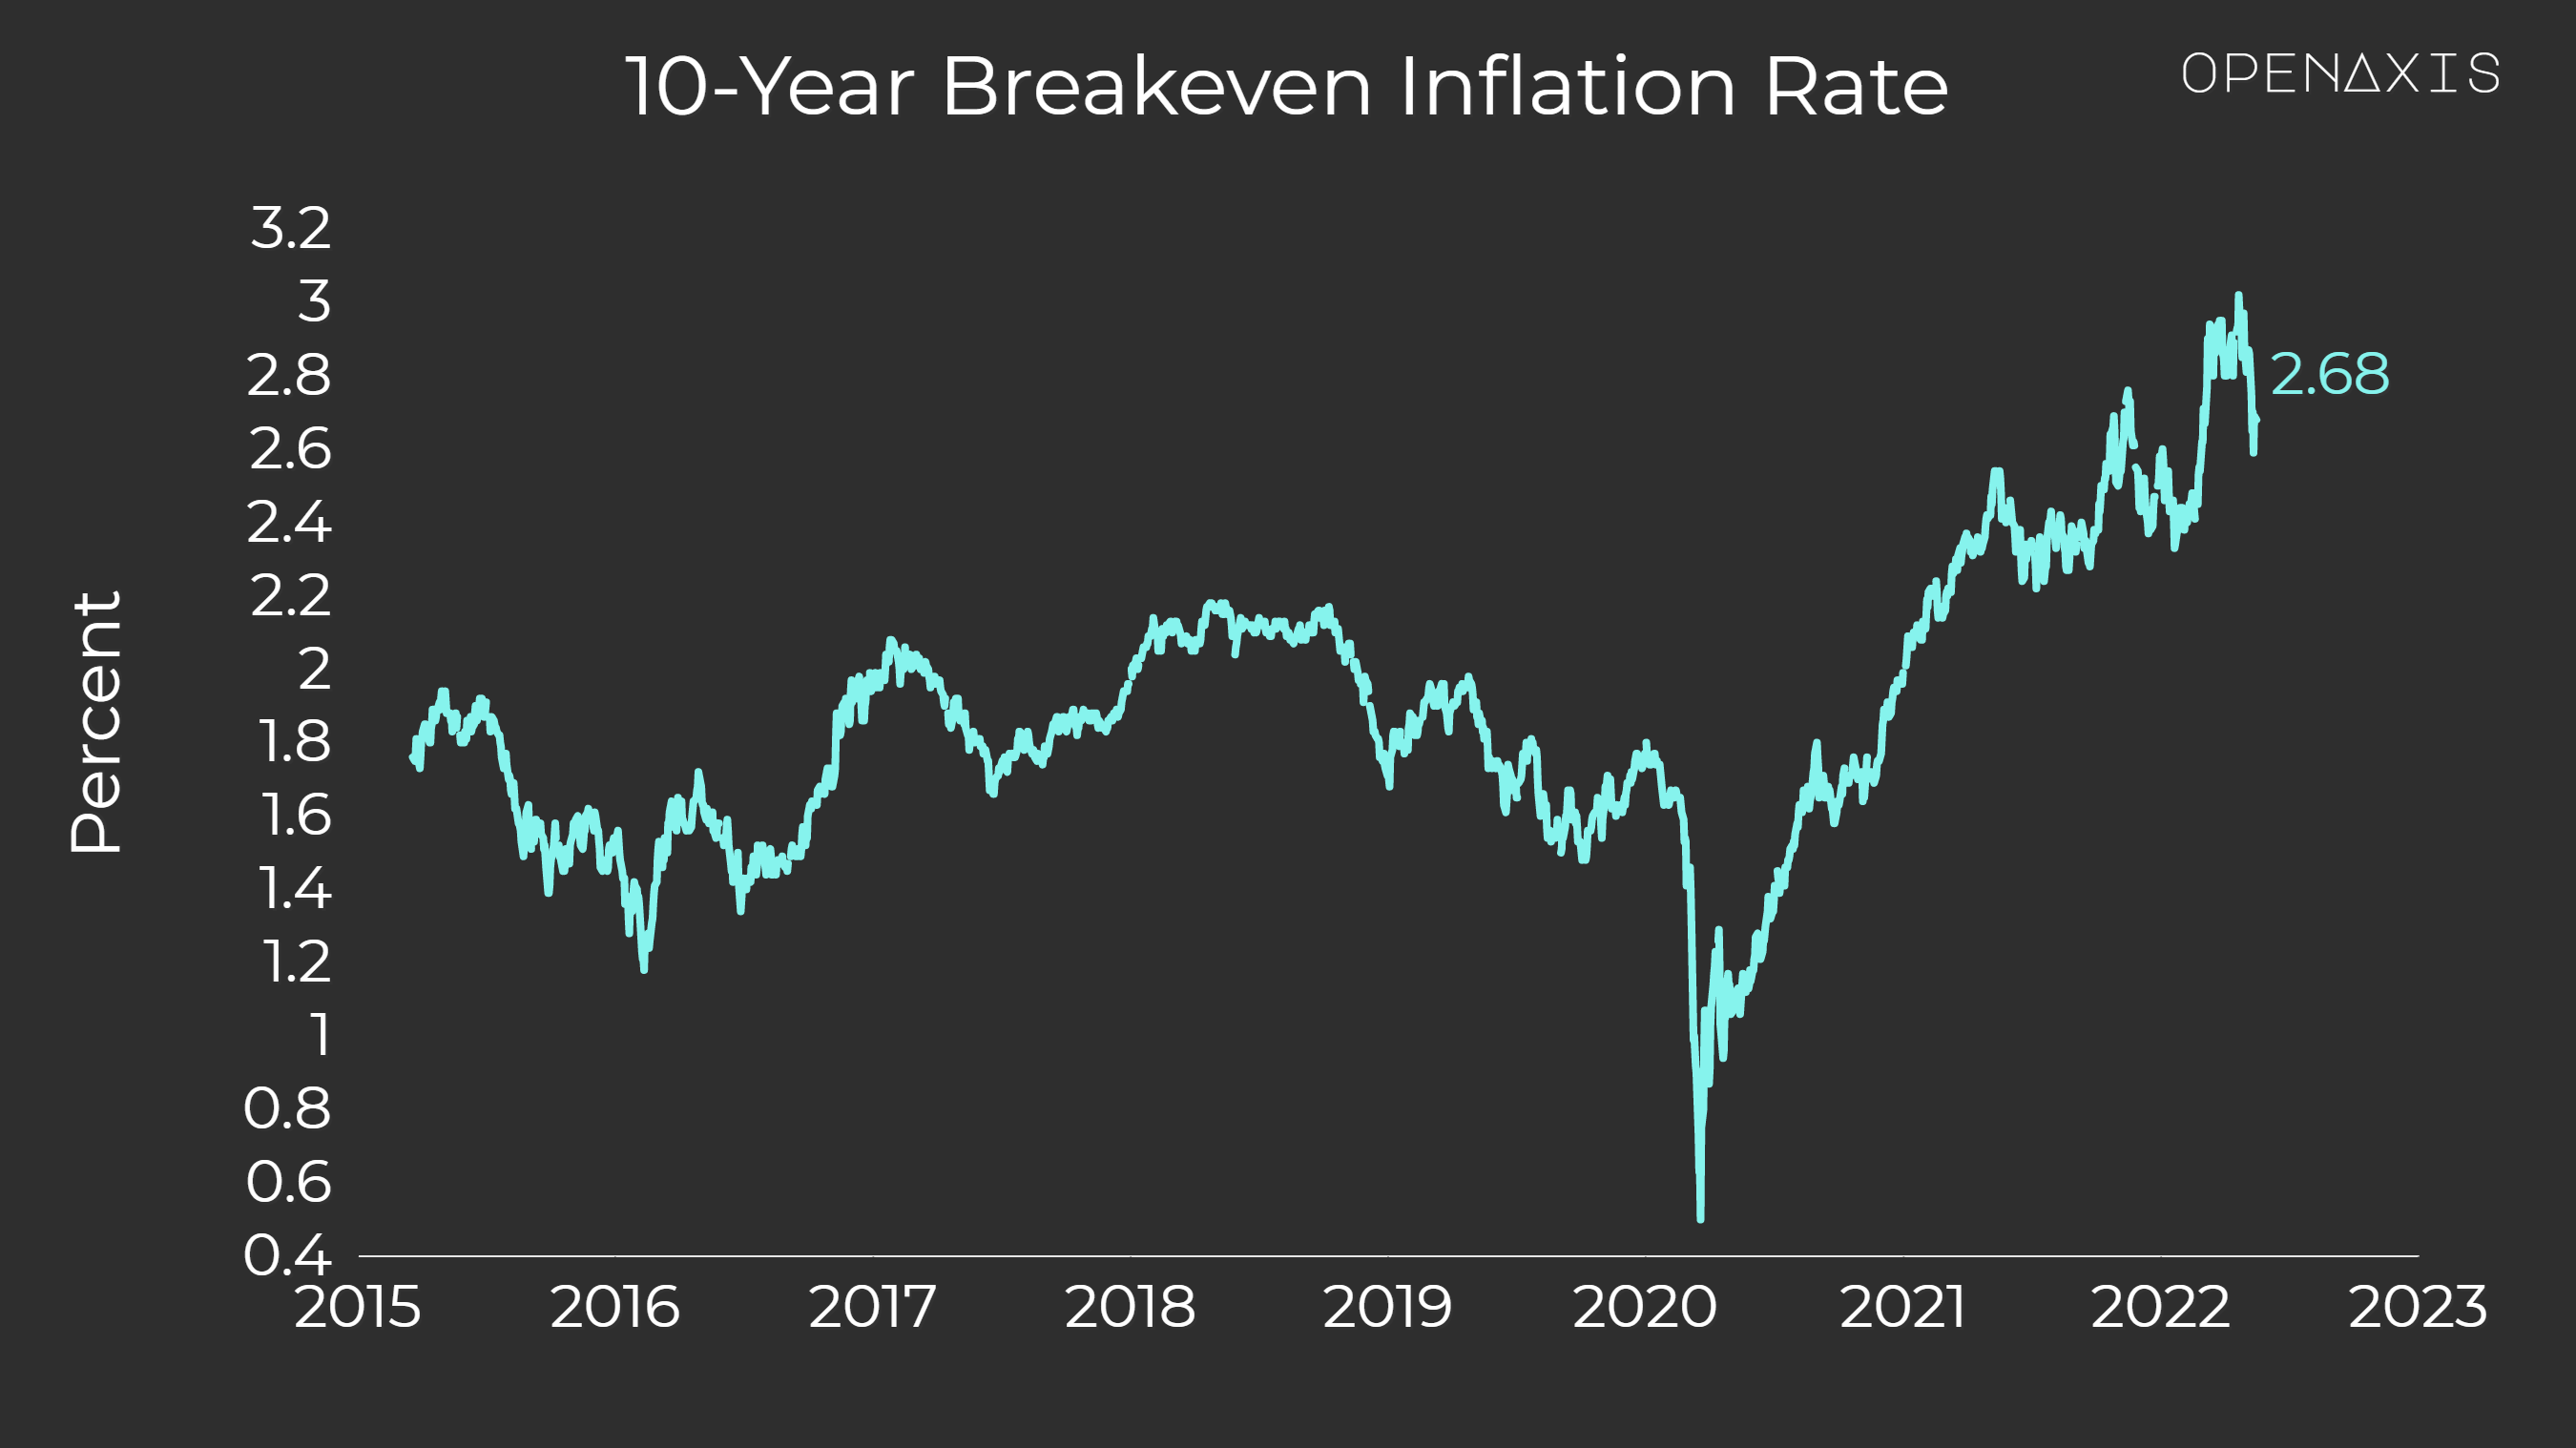 "10-Year Breakeven Inflation Rate"